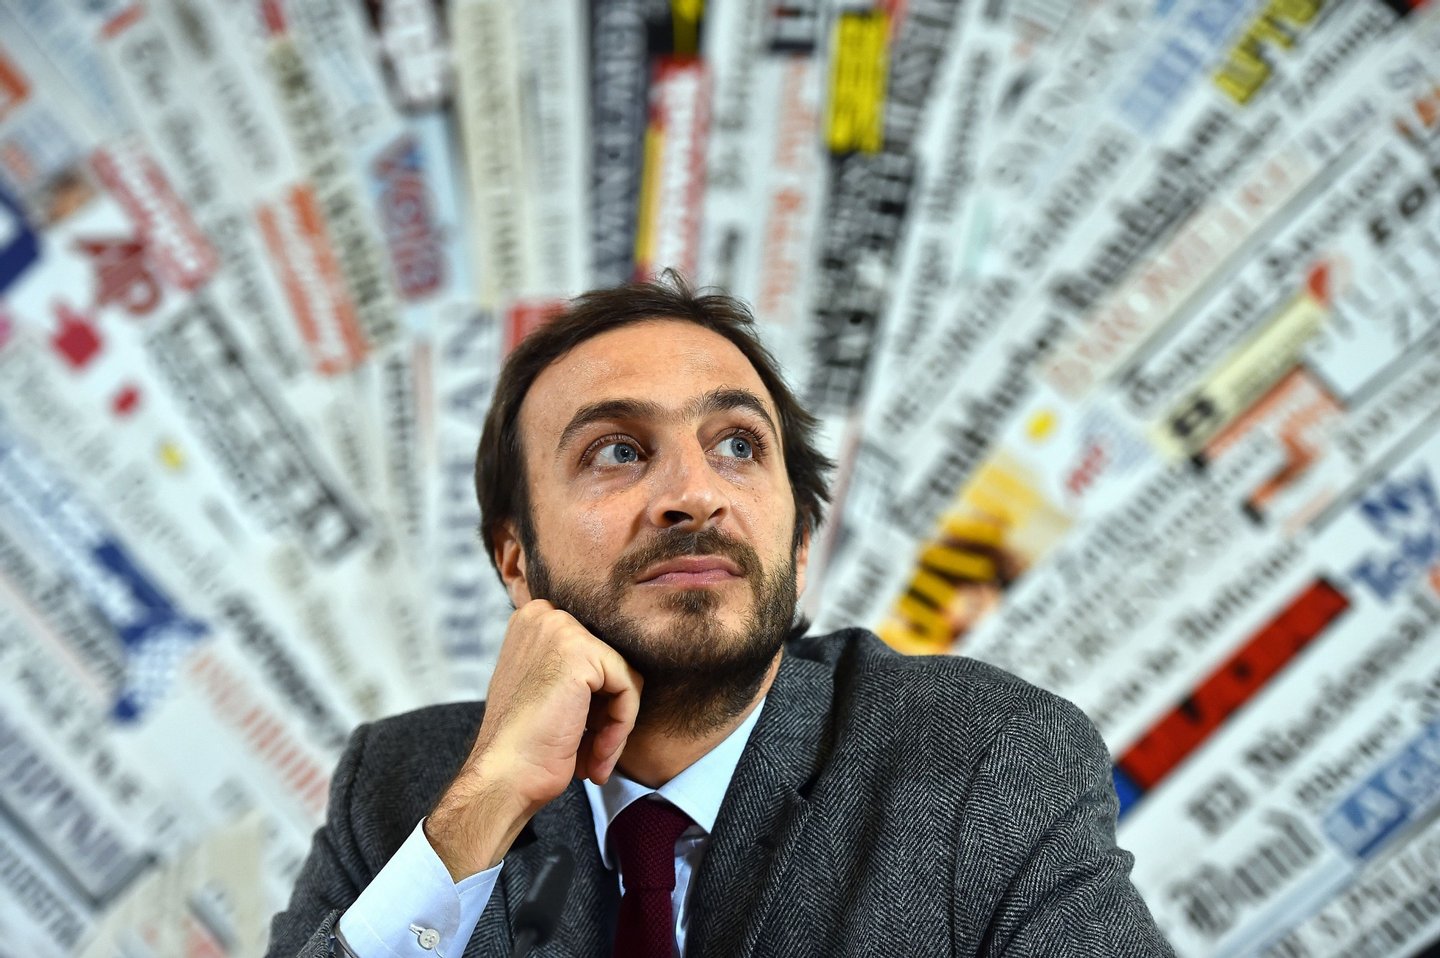 Emiliano Fittipaldi, one of two Italian journalists facing a criminal probe over leaks from the Vatican, gives a press conference on November 17, 2015 in Rome, a day after a hearing at the Vatican. AFP PHOTO / GABRIEL BOUYS (Photo credit should read GABRIEL BOUYS/AFP/Getty Images)